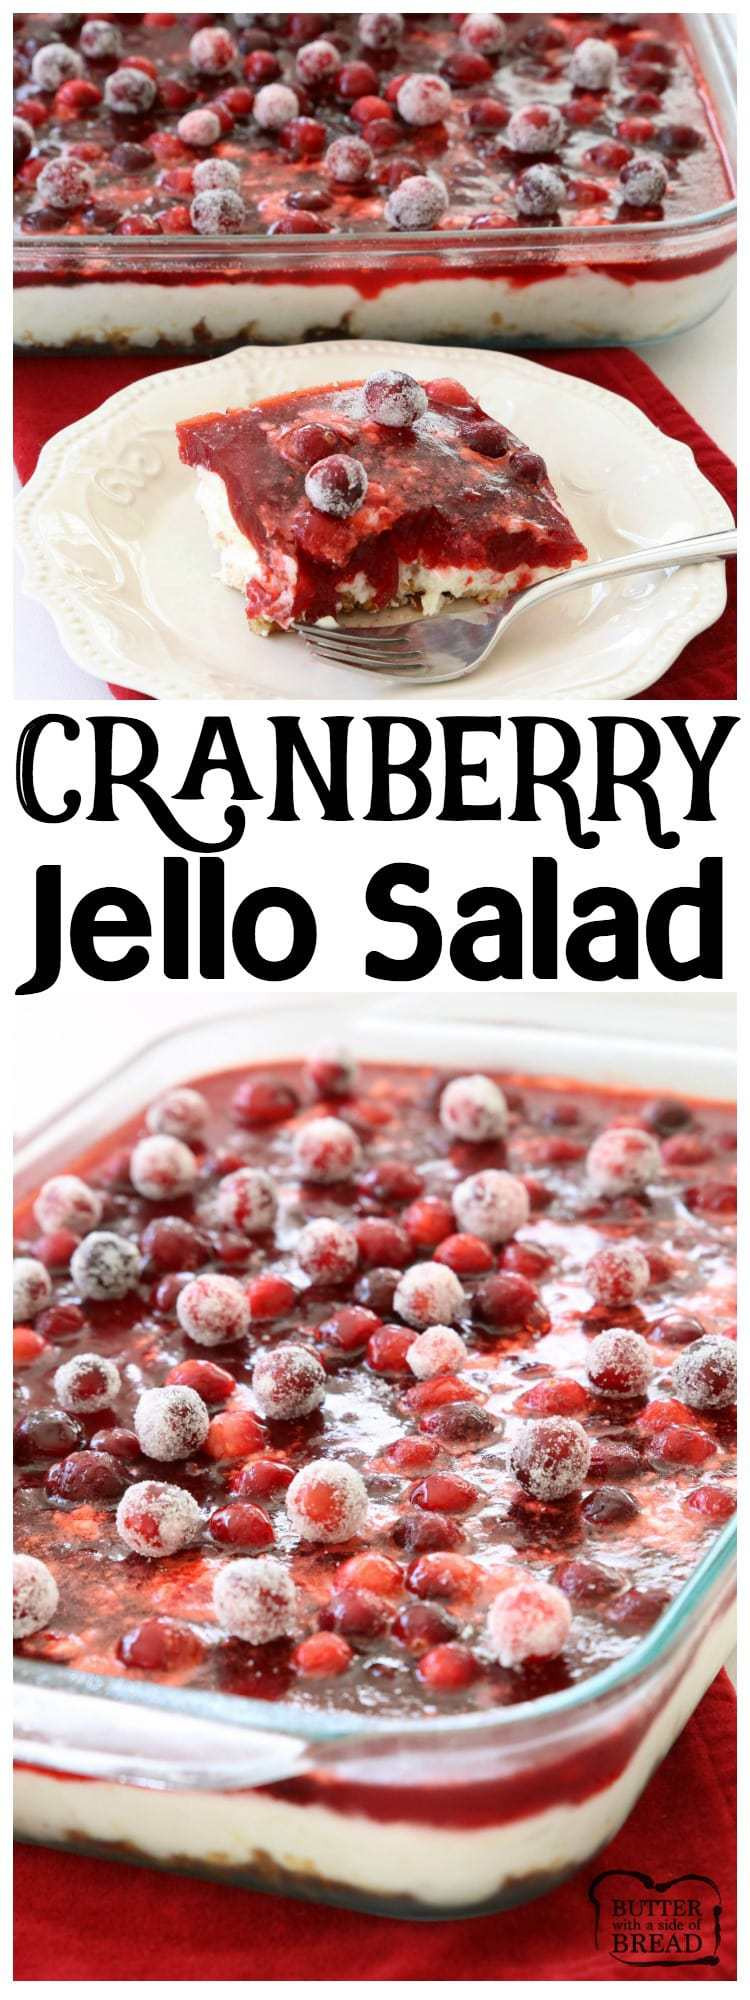 Jello Salads For Thanksgiving Dinner
 CRANBERRY JELLO SALAD Butter with a Side of Bread